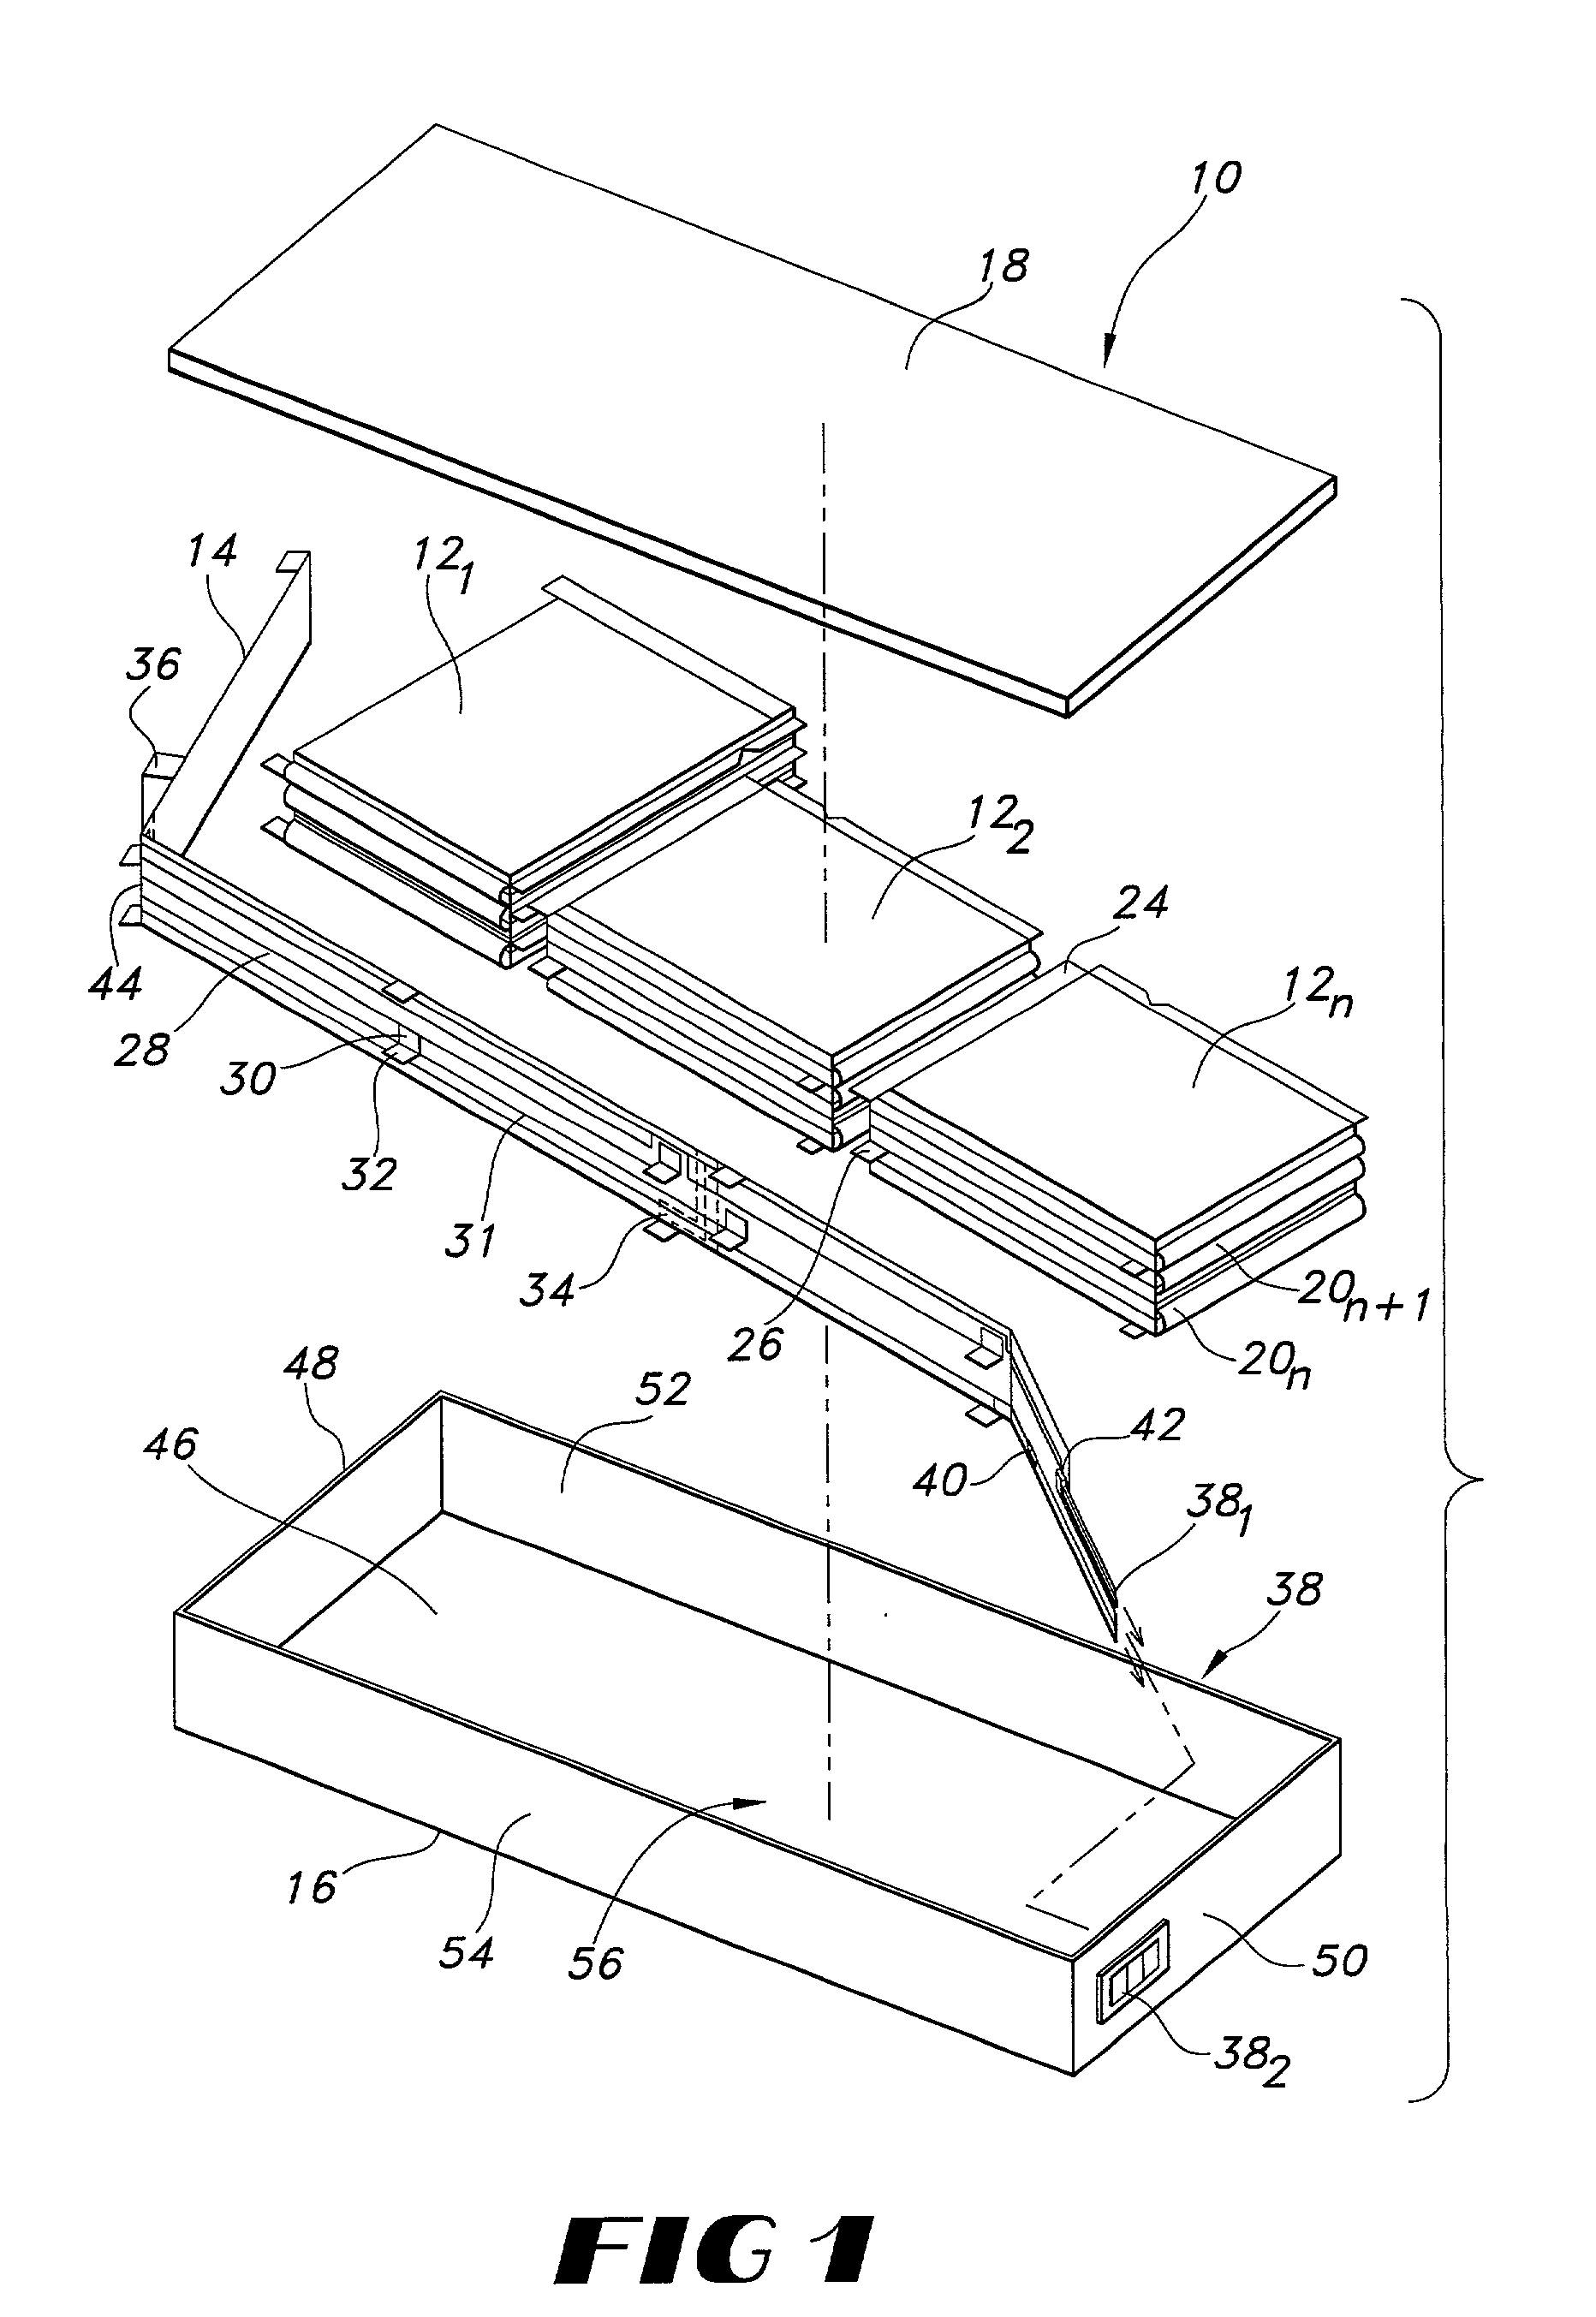 Battery pack having improved battery cell terminal configuration